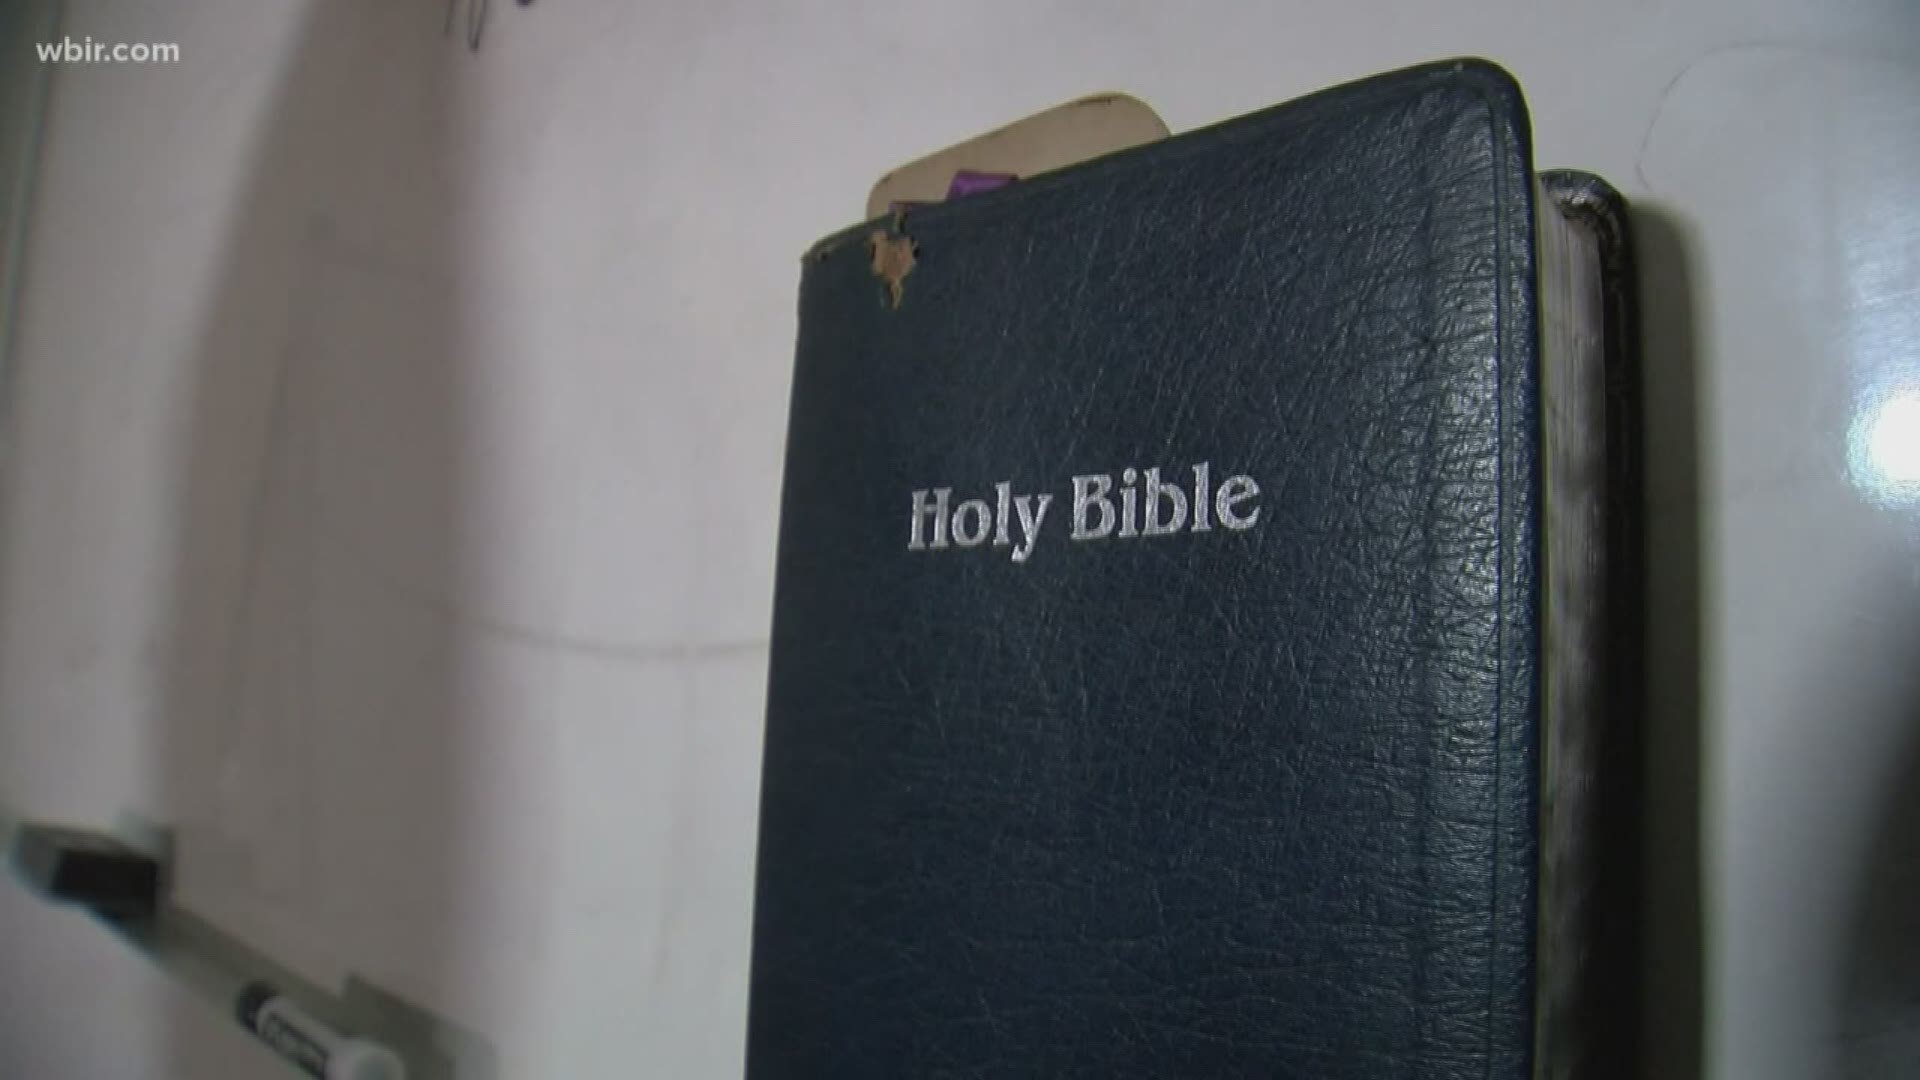 A post circulating on Facebook is causing Knox County School parents to ask questions about the possibility of a Bible release program being implemented